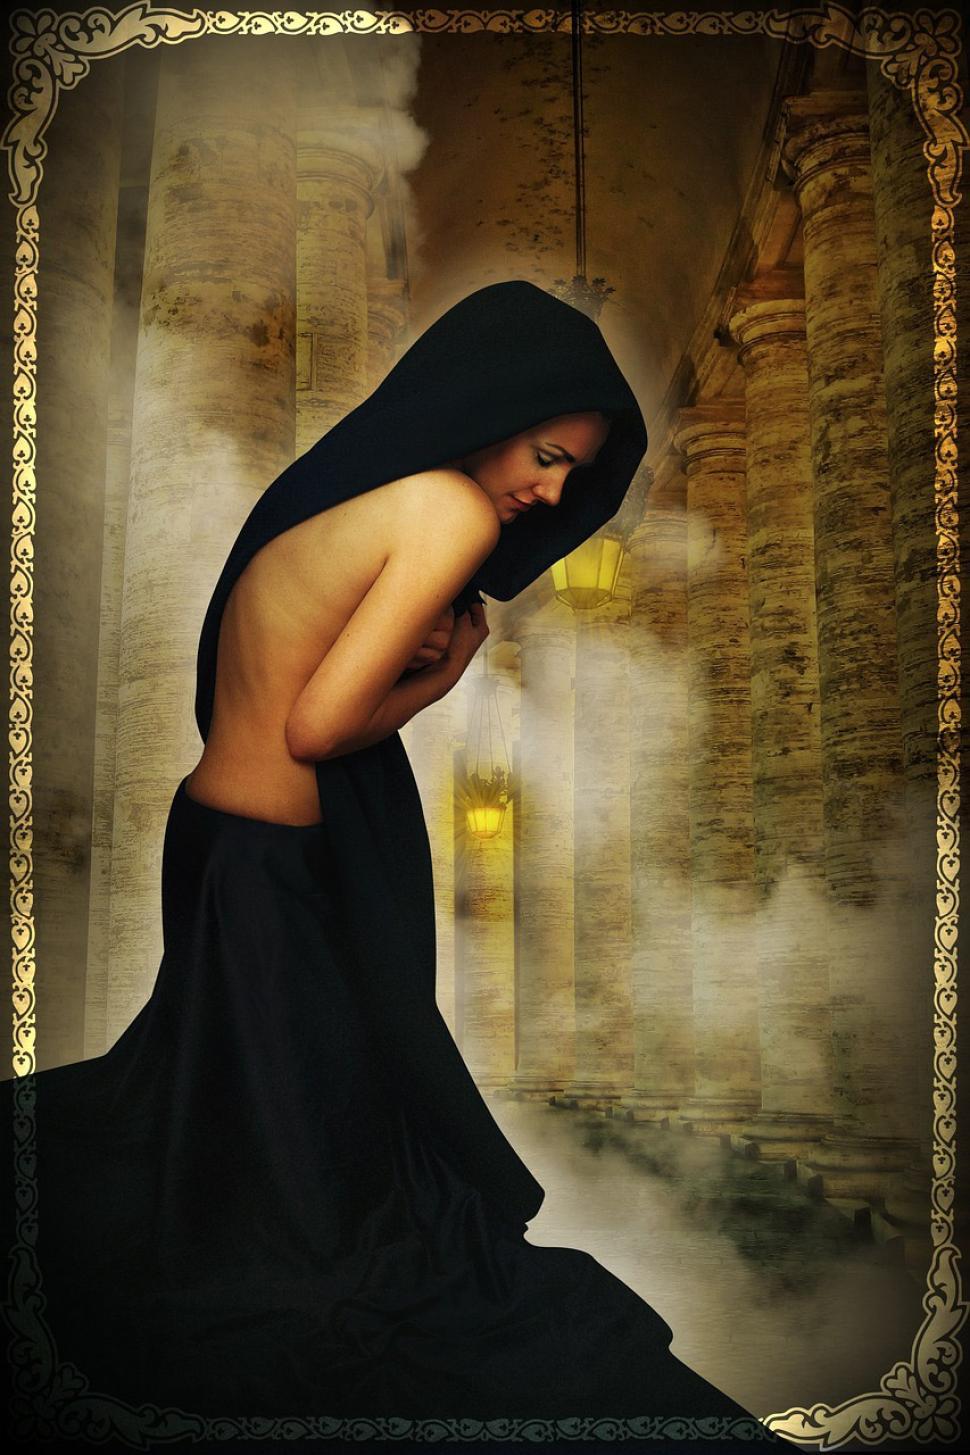 Free Image of Woman in Black Dress Smoking a Cigarette 